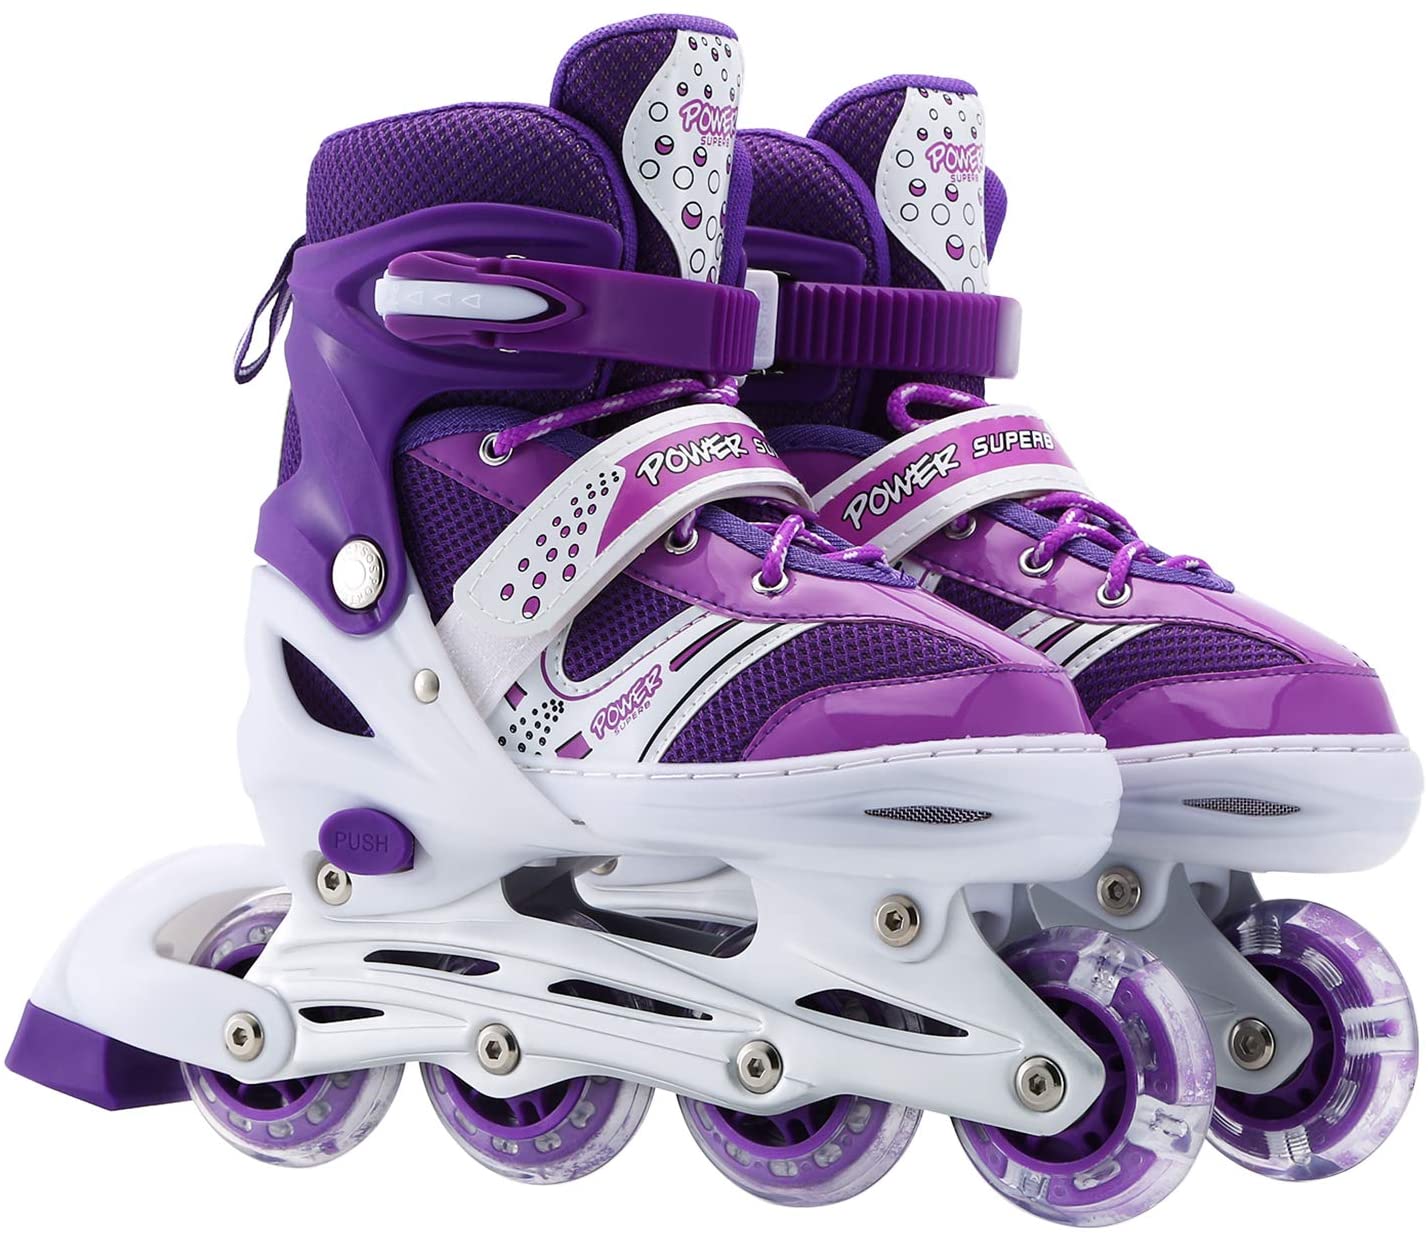 Kids Adjustable Inline Skates, Perfect First Skates for Girls and Boys with All Illuminating Wheels, Youth Children's Indoor&Outdoor Ice Skating Equipment.